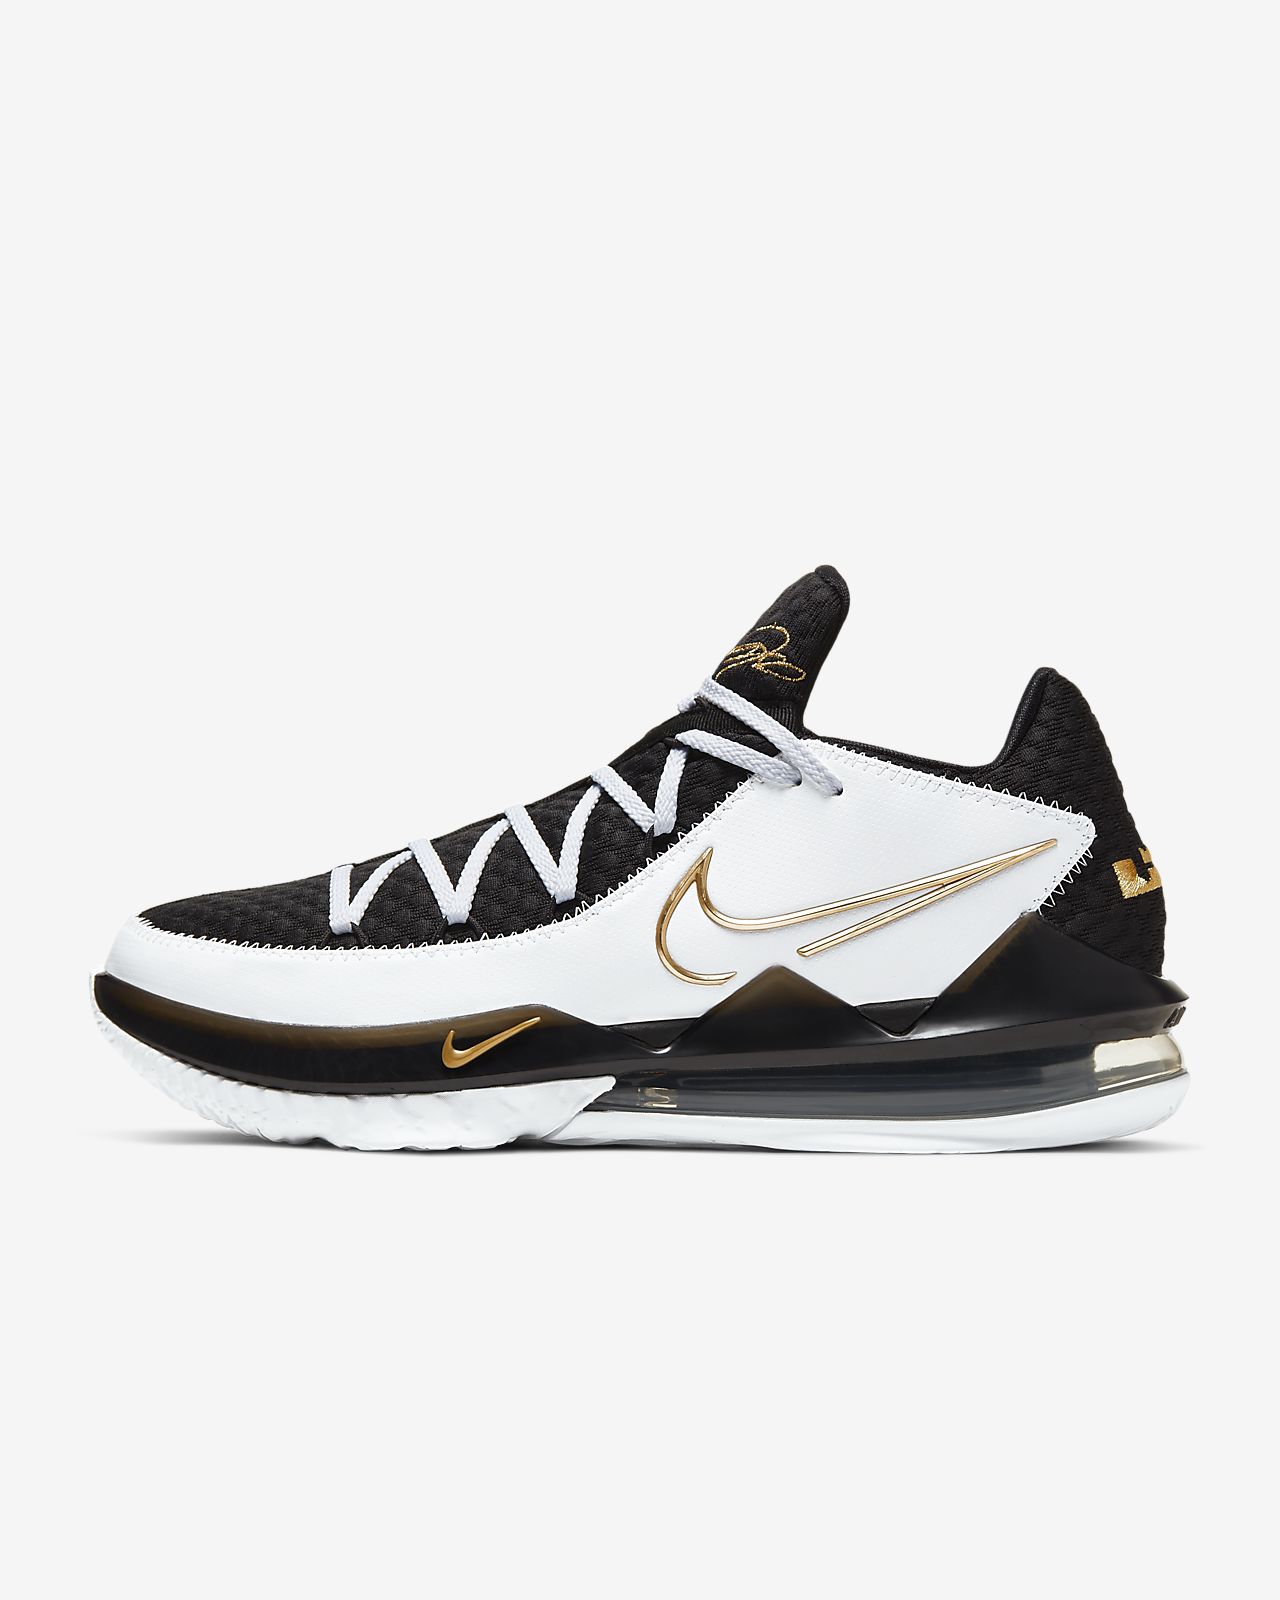 lebron shoes low top, OFF 79%,Best 